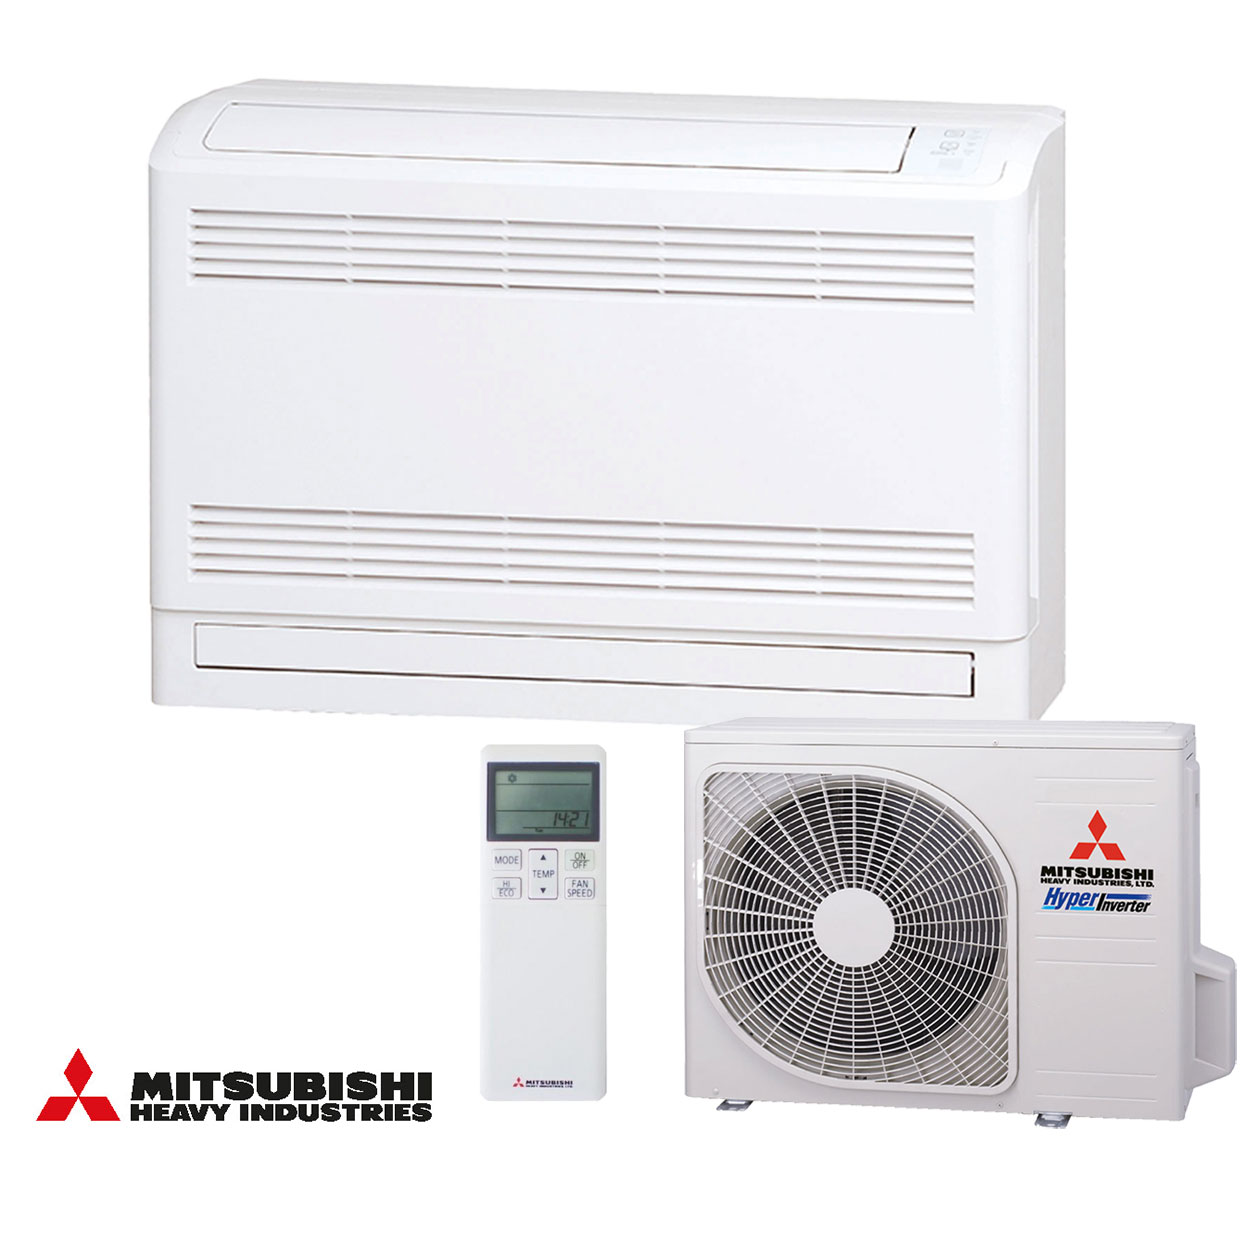 Complete set vloermodel airconditioning